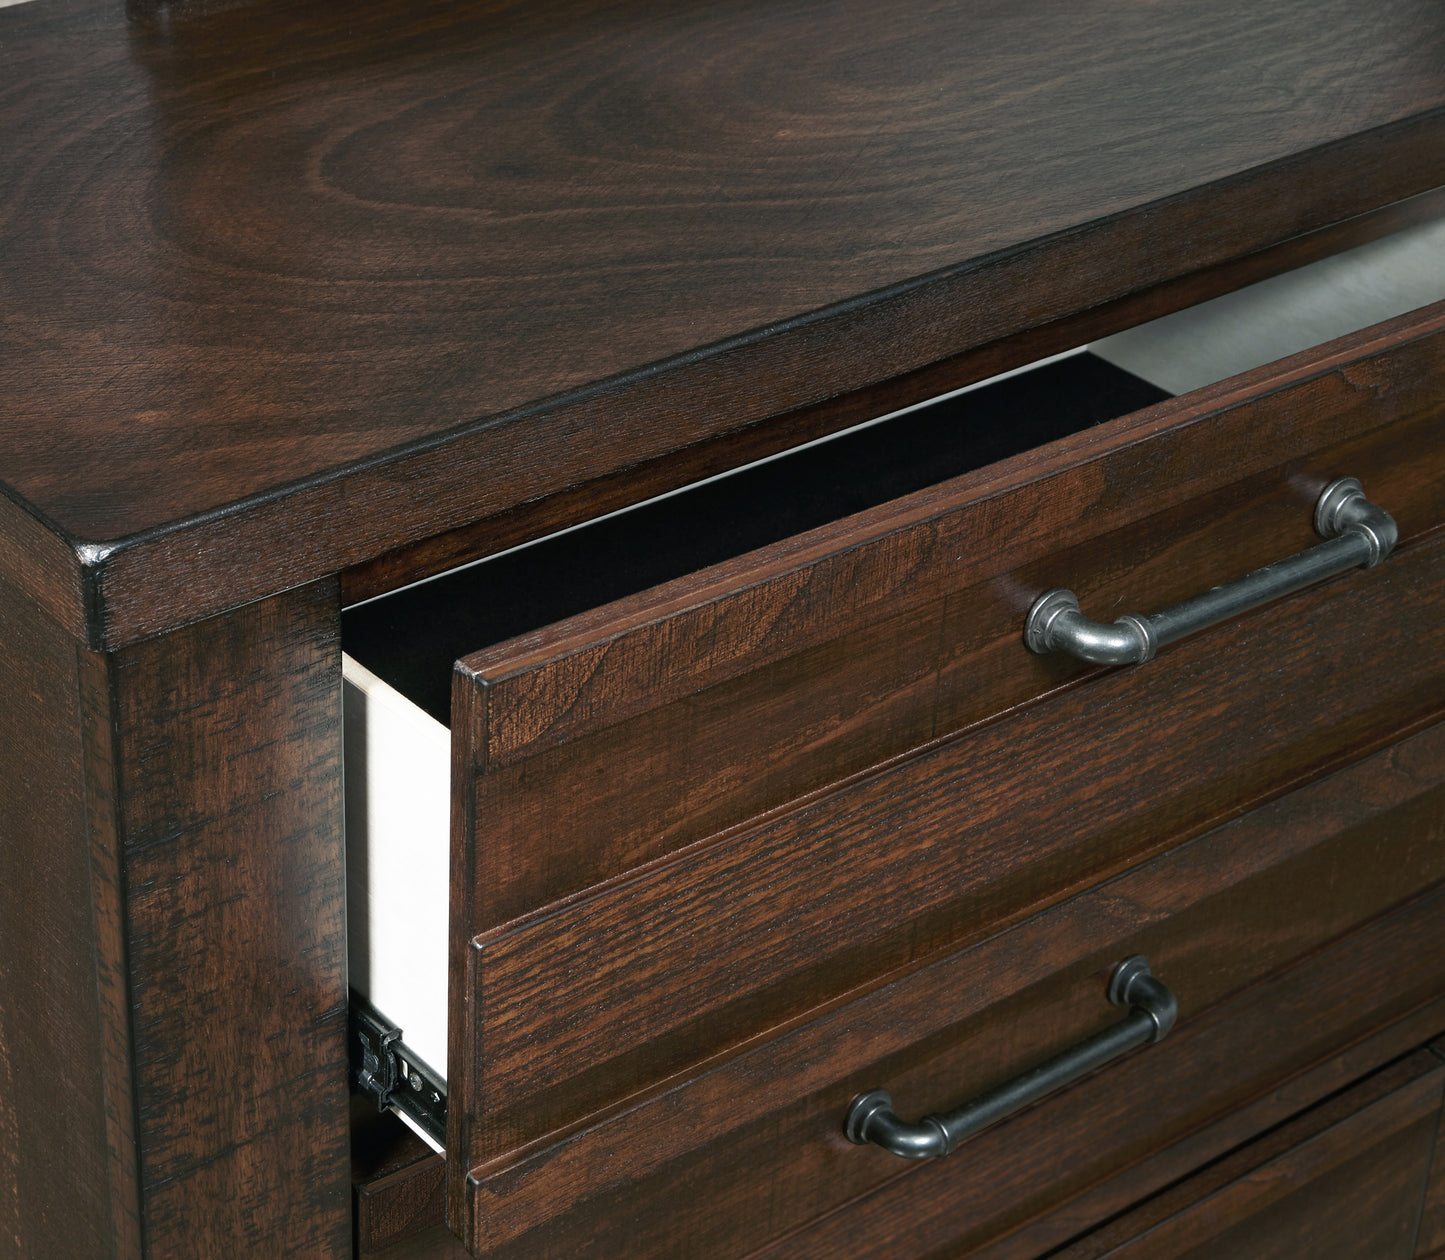 Sedona Transitional Wood 5-Drawer Chest in Espresso